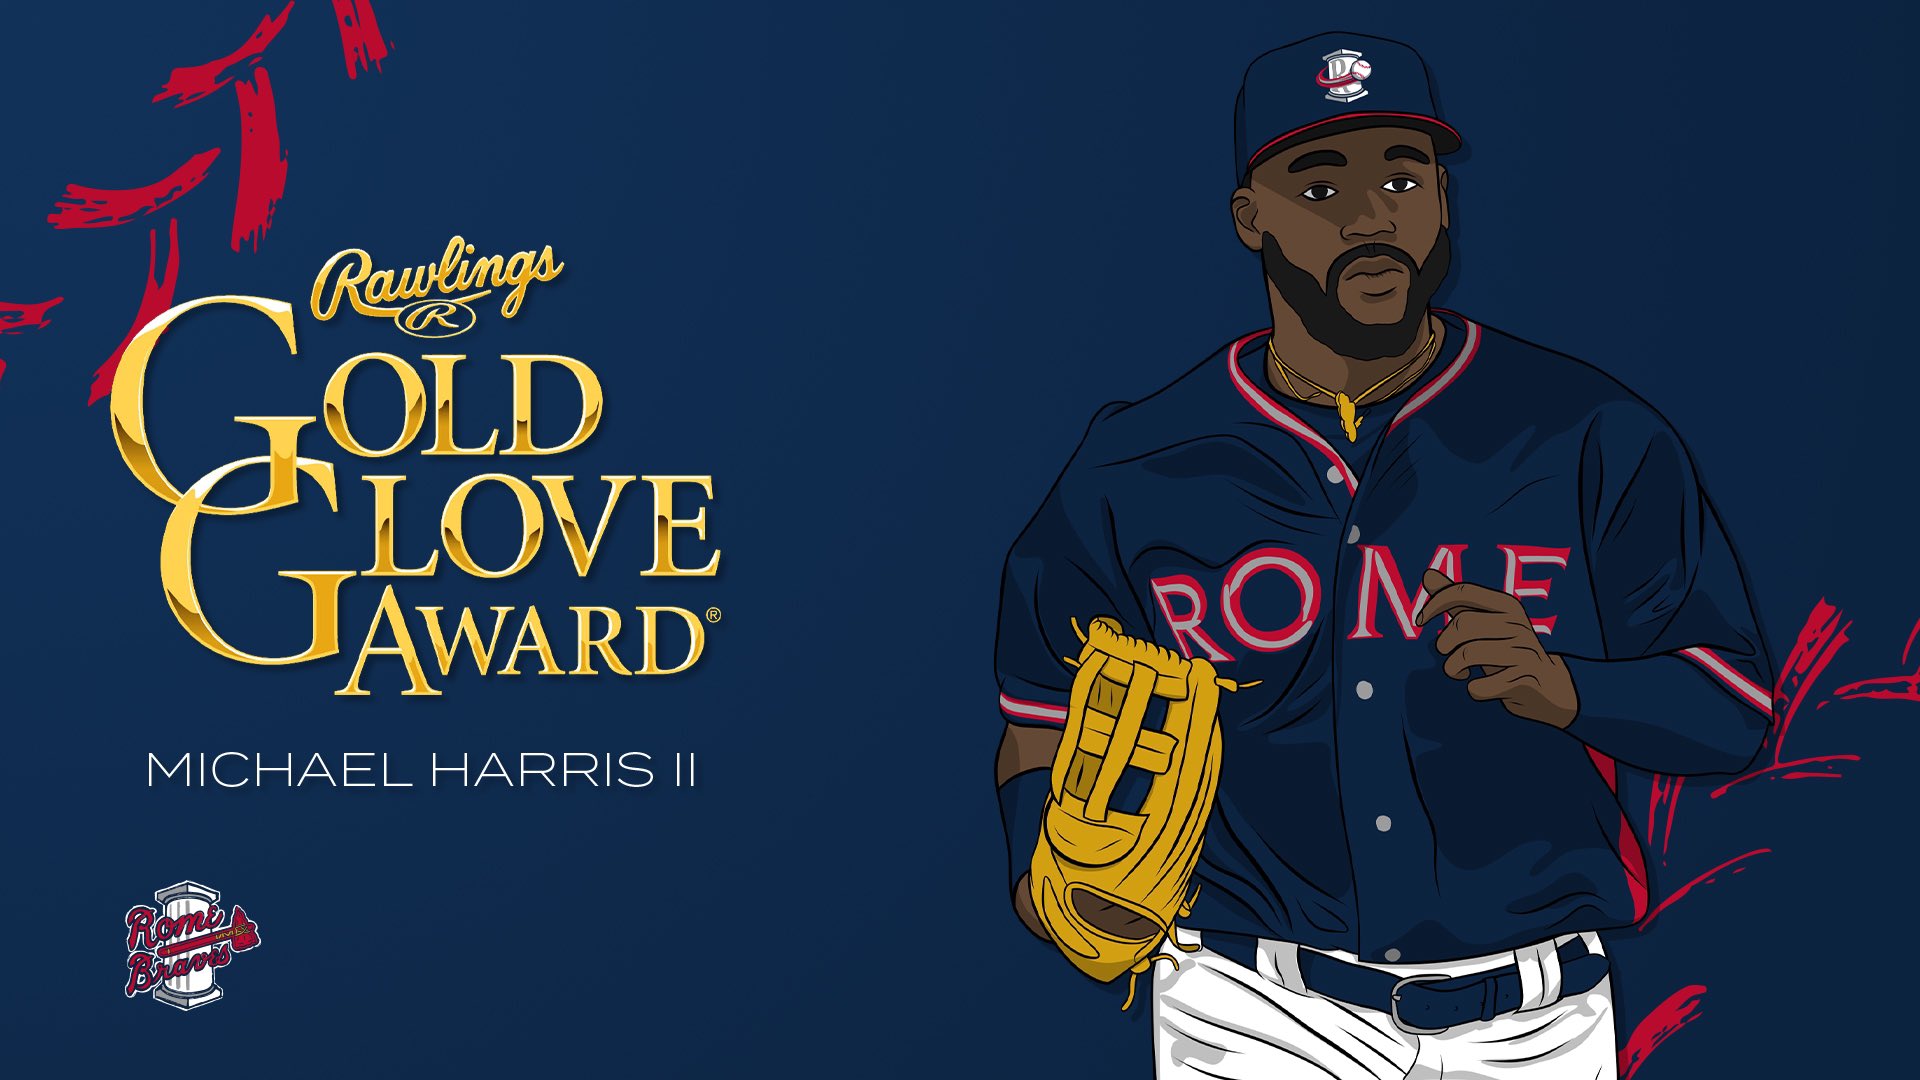 Michael Harris II to be presented with 2021 Rawlings Gold Glove Award® on  Tuesday